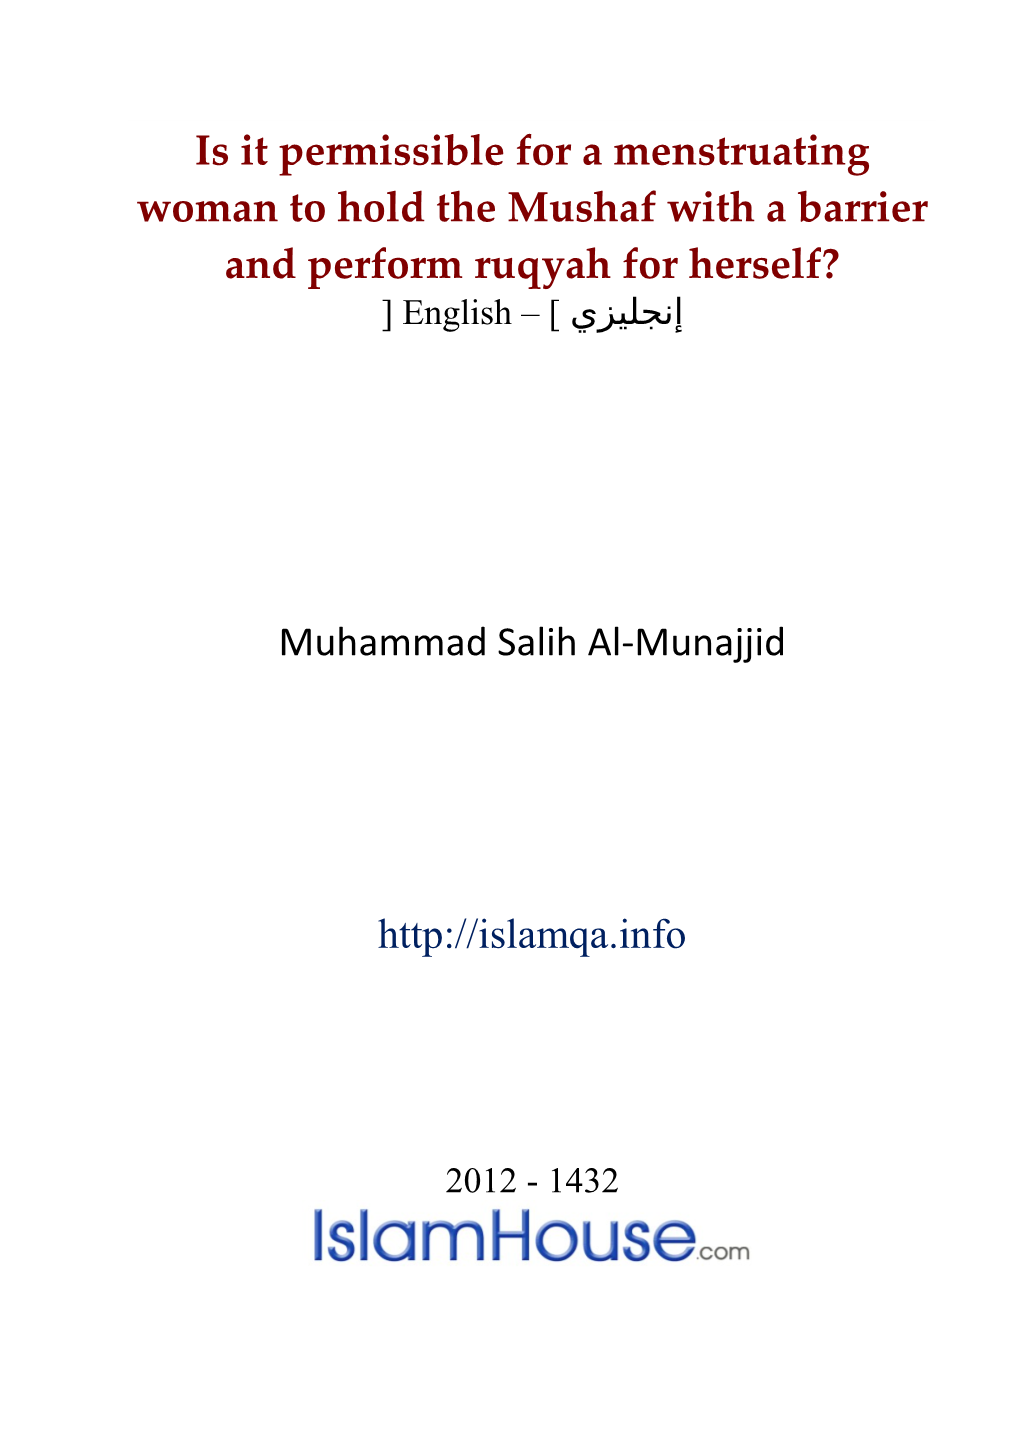 Is It Permissible for a Menstruating Woman to Hold the Mushaf with a Barrier and Perform